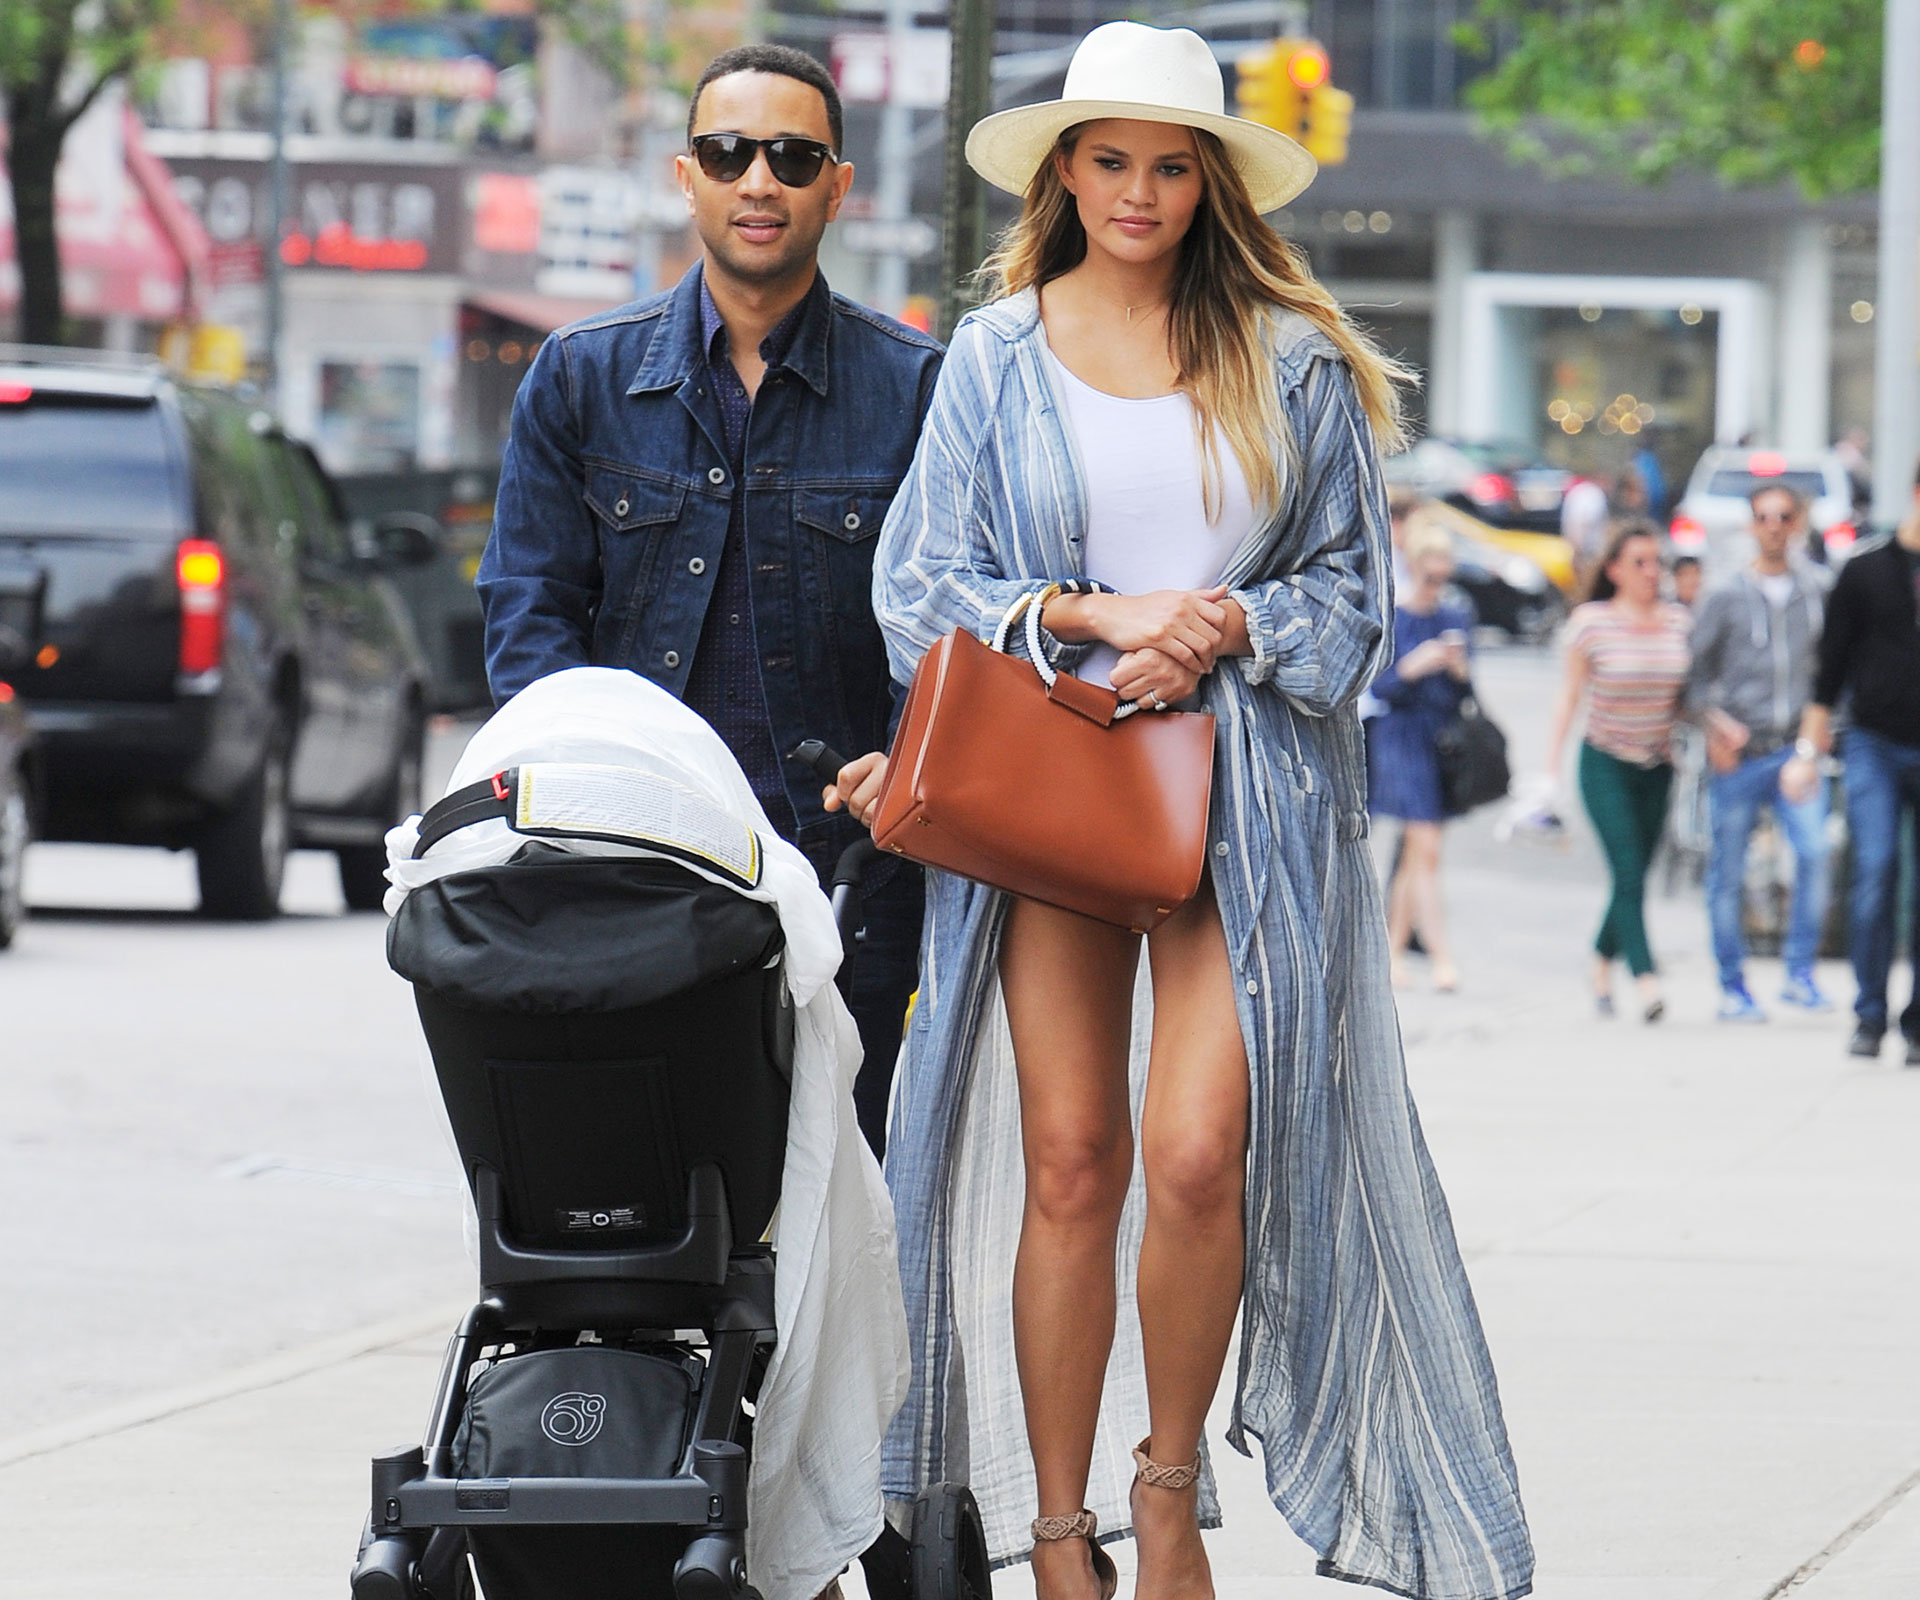 Chrissy Teigen Snapchats her stretch marks, we fall in love